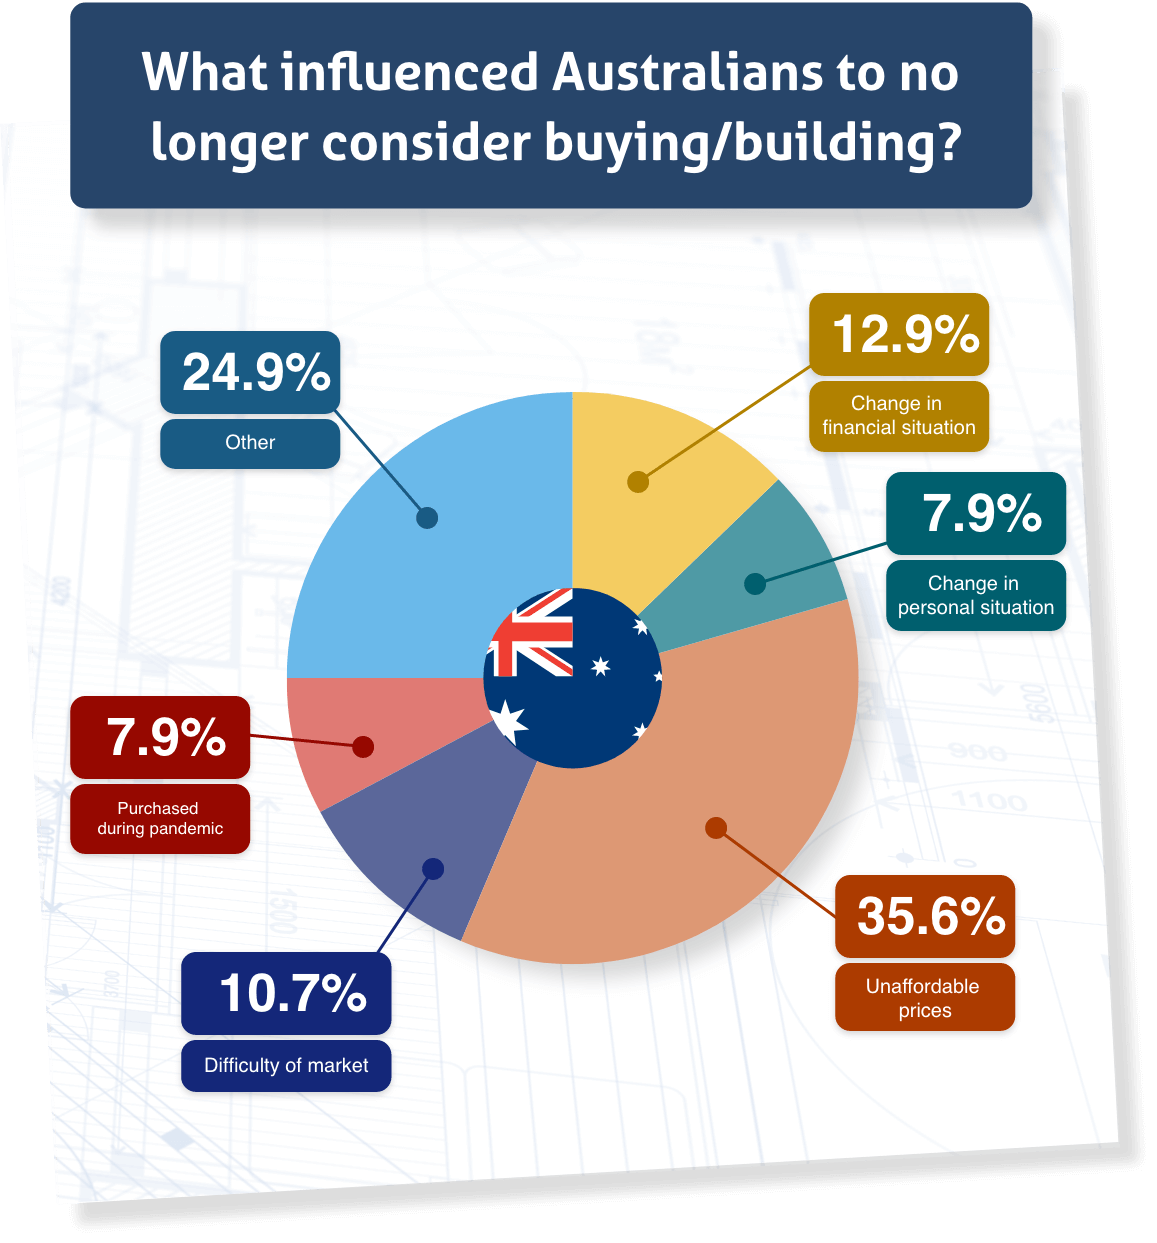 A chart showing what different factors influenced Australians to no longer consider buying or building a new home during the pandemic.